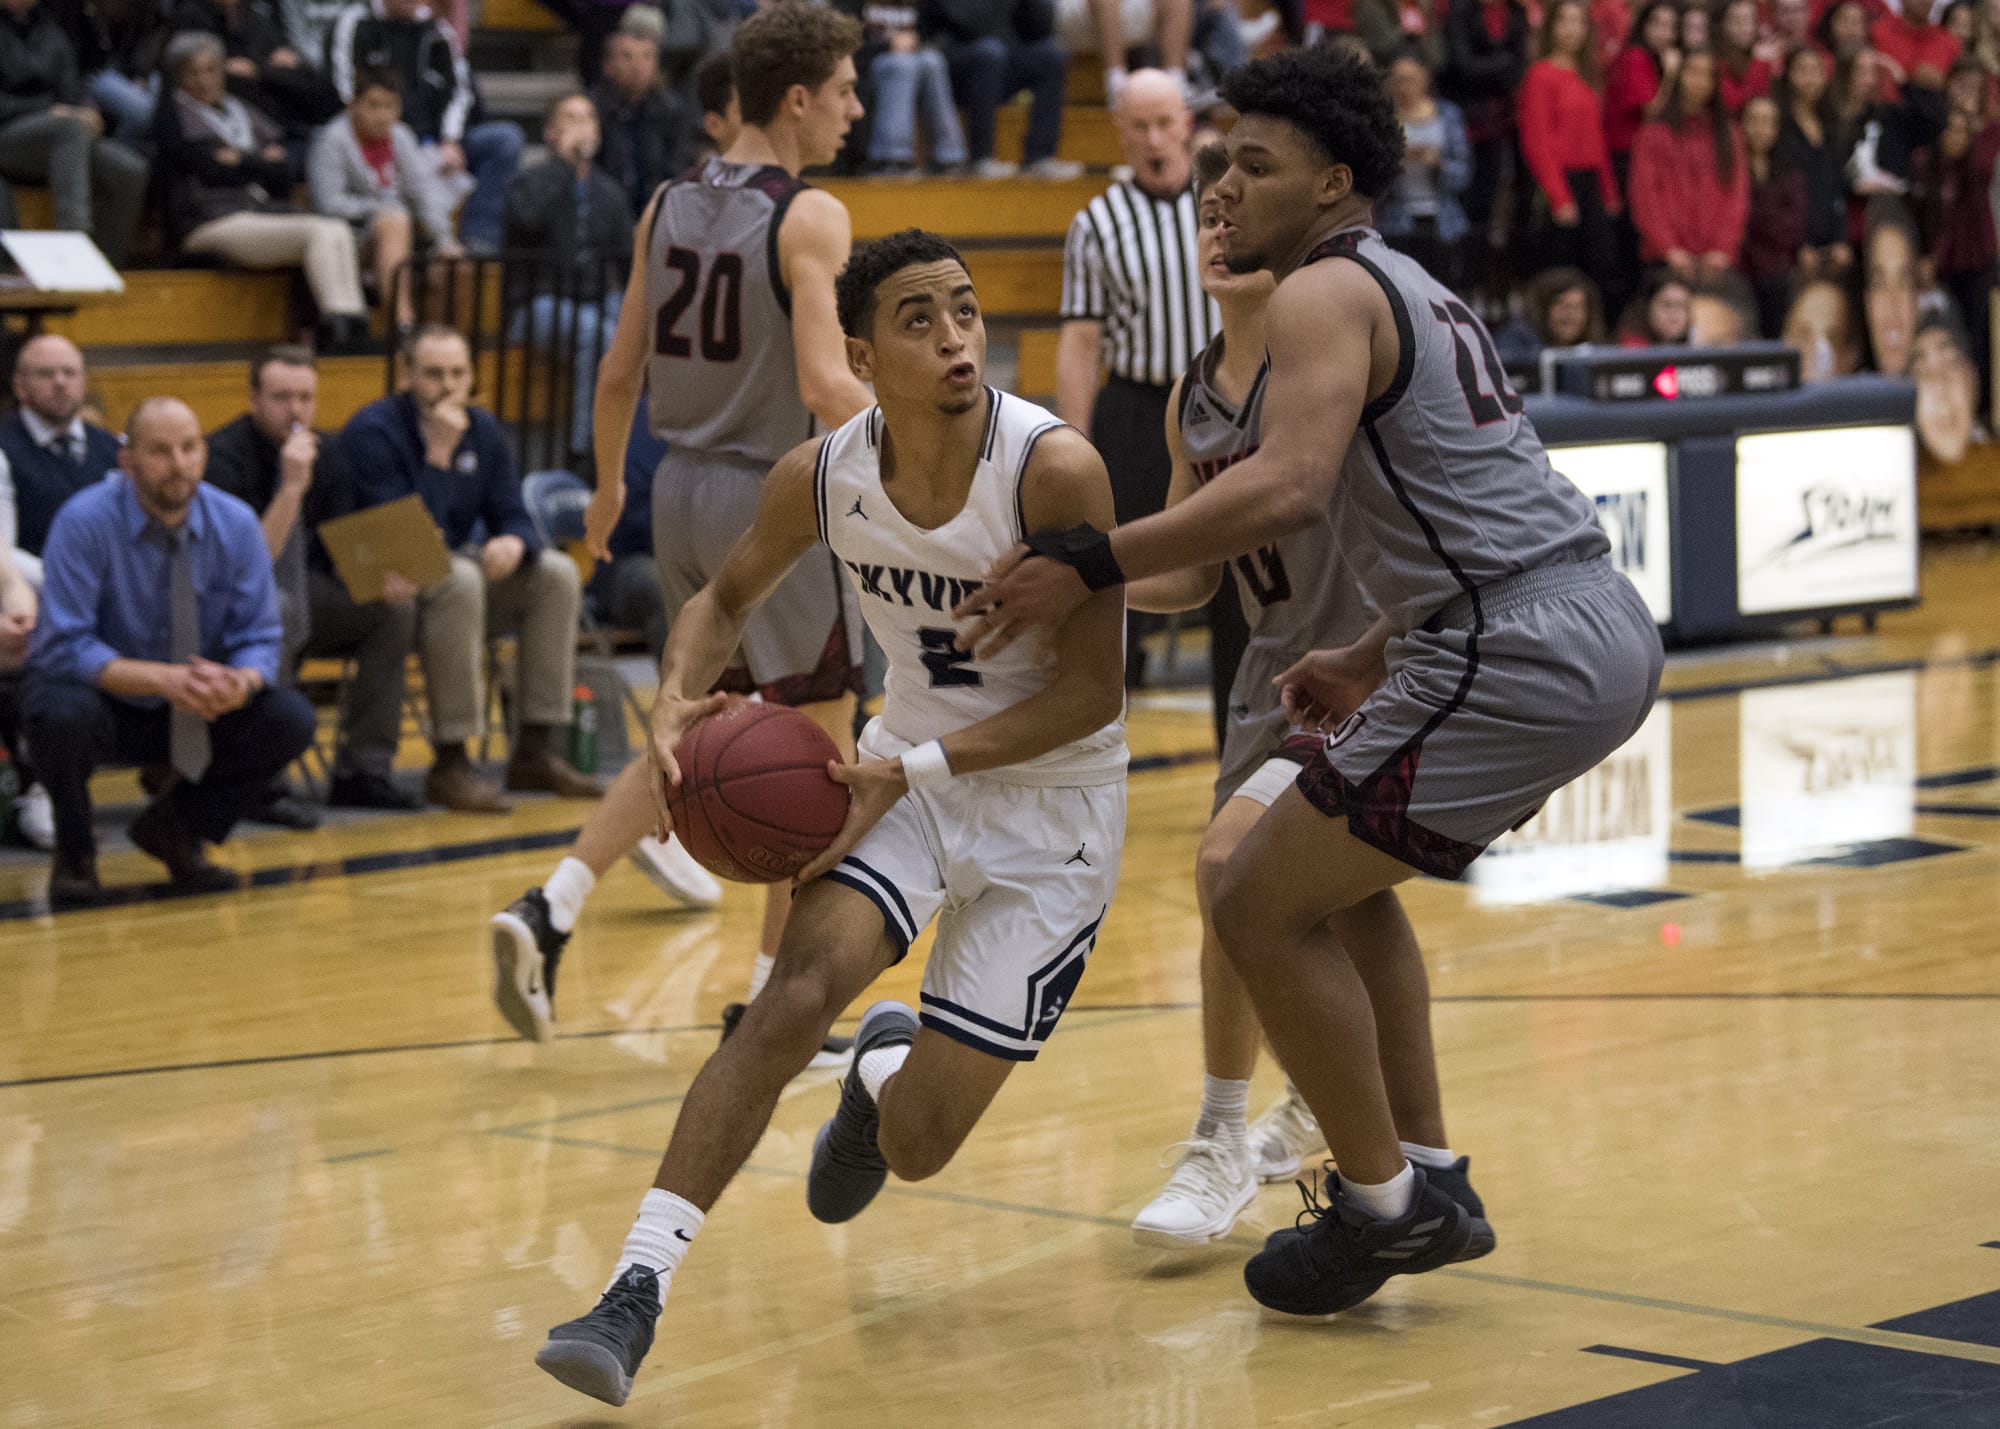 Skyview's Jovon Sewell (2) dribbles past Union's Alishawuan Taylor (22) during Friday night's game at Skyview High School in Vancouver on Jan. 5, 2018. Skyview defeated Union 59-55.